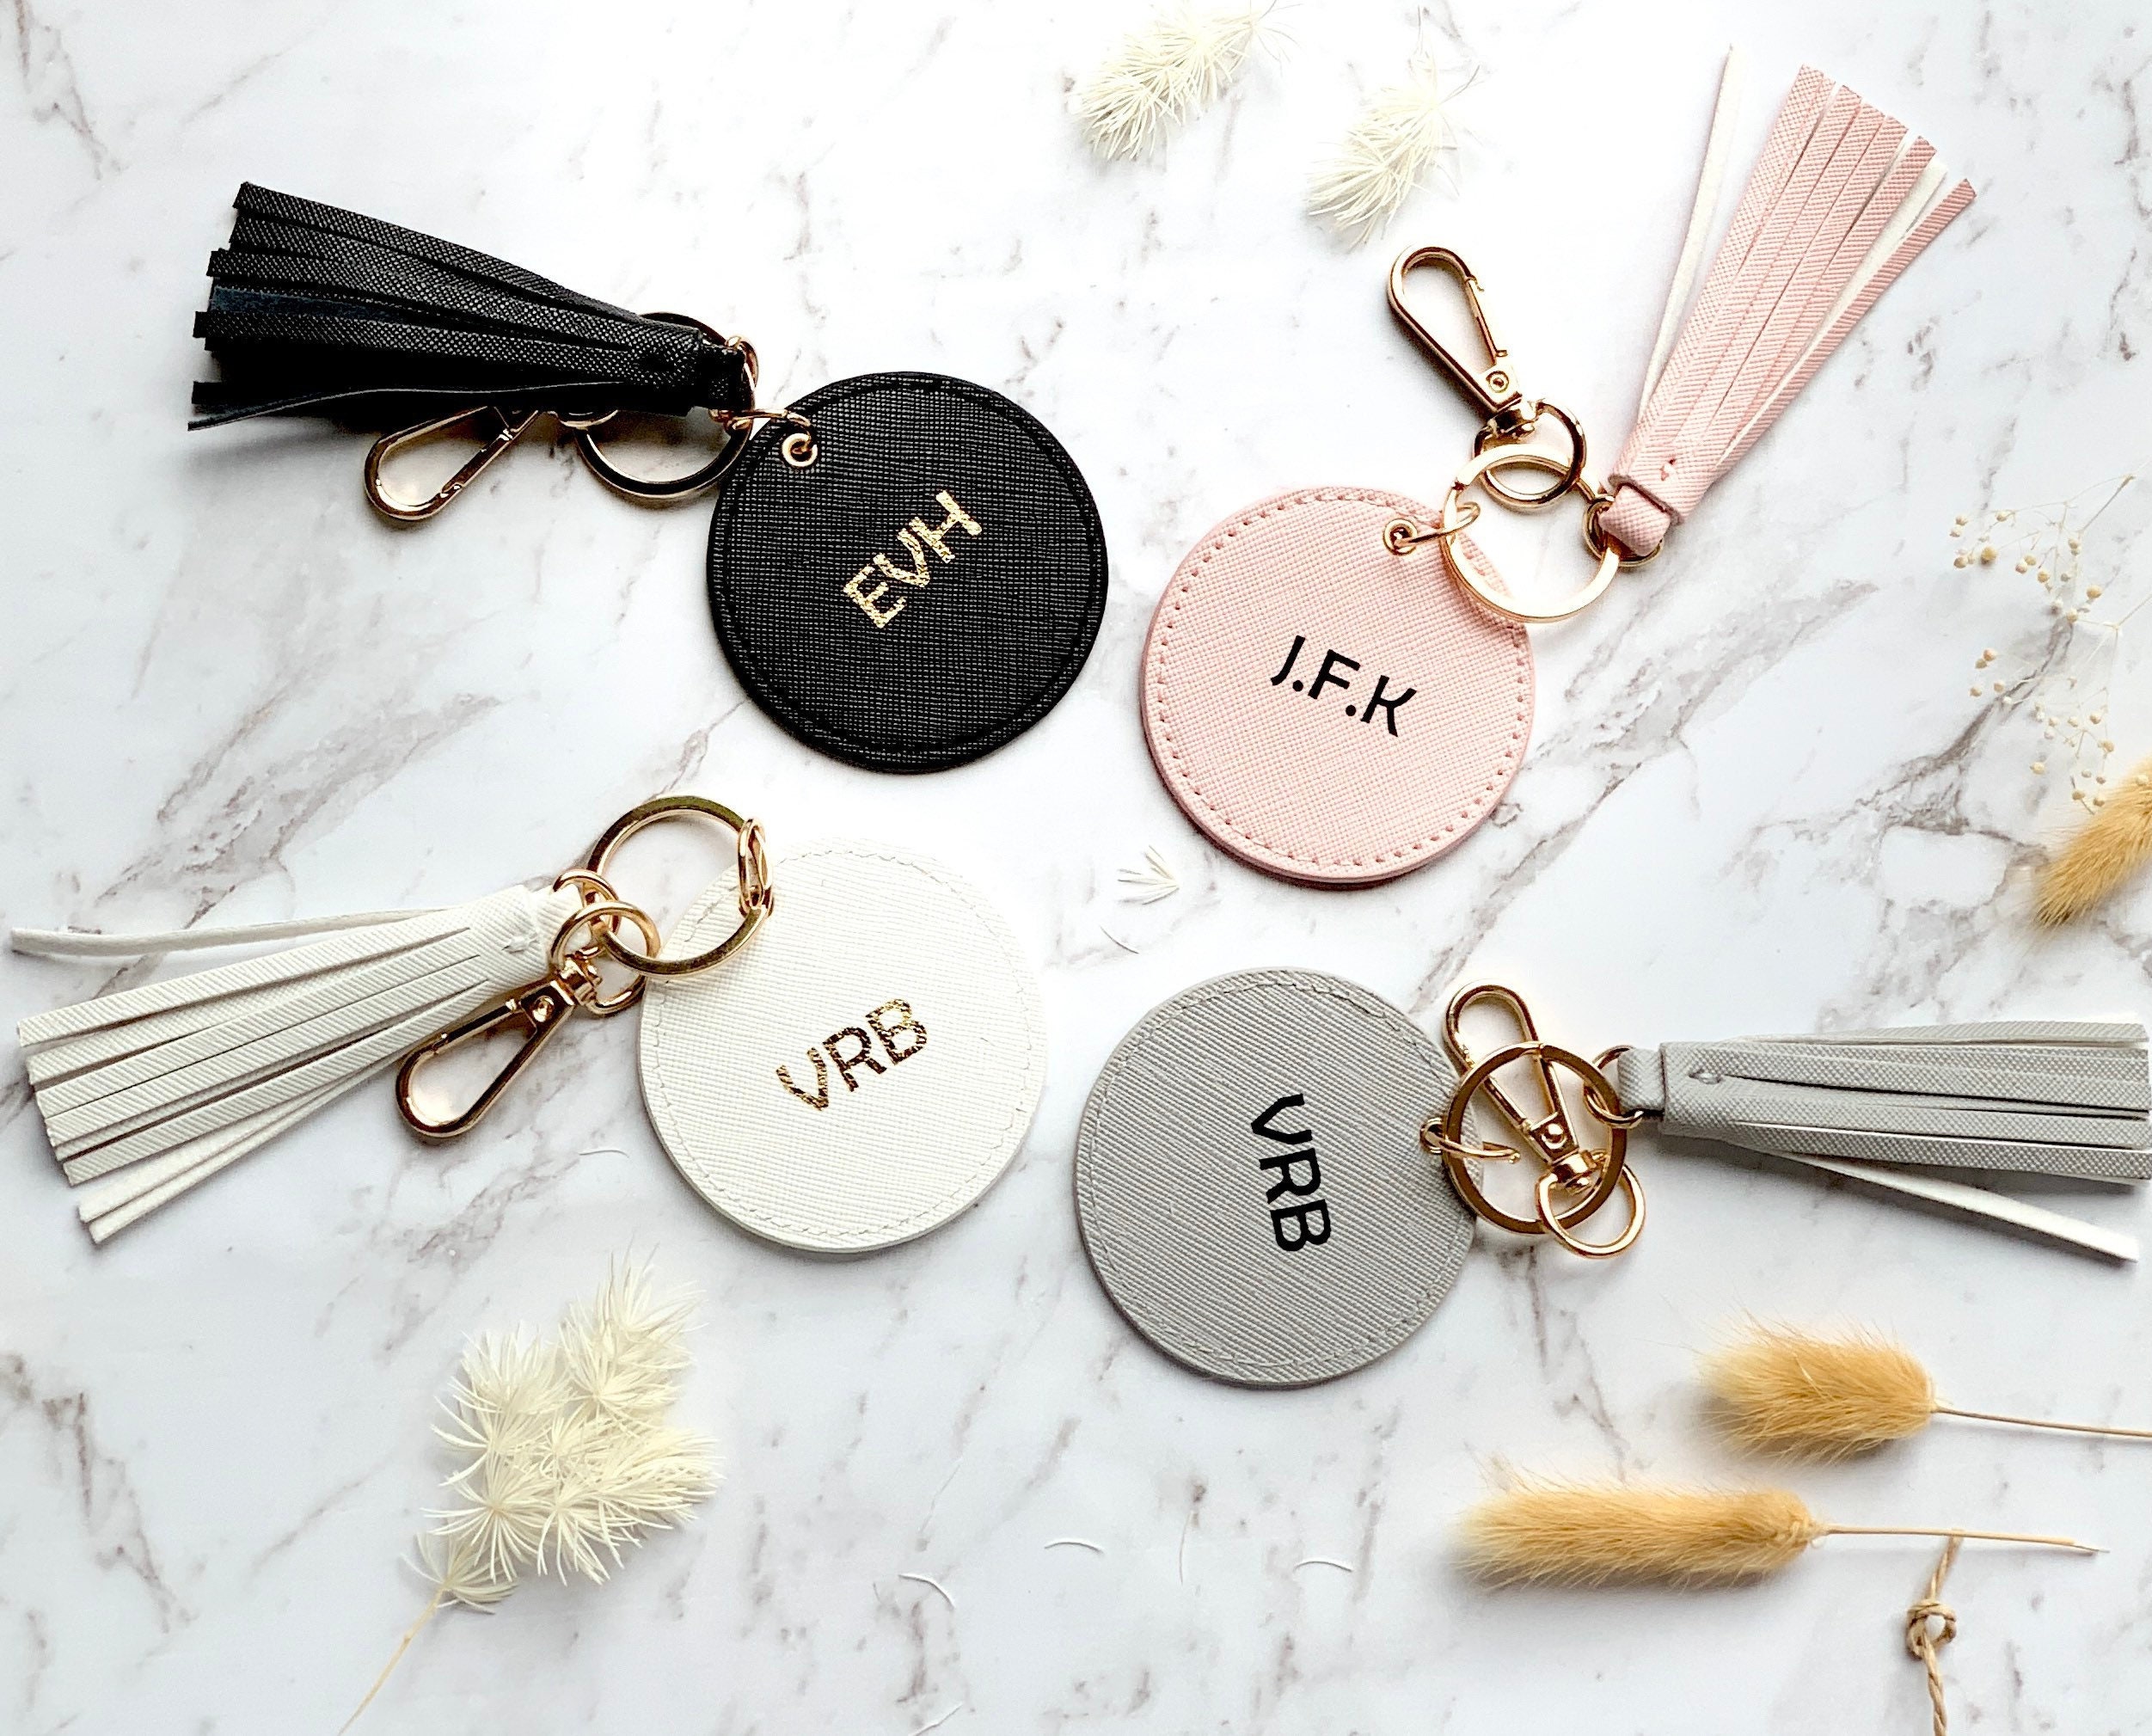 Personalized Name Initial Letter Keychain leather charm pendant – Carsoda